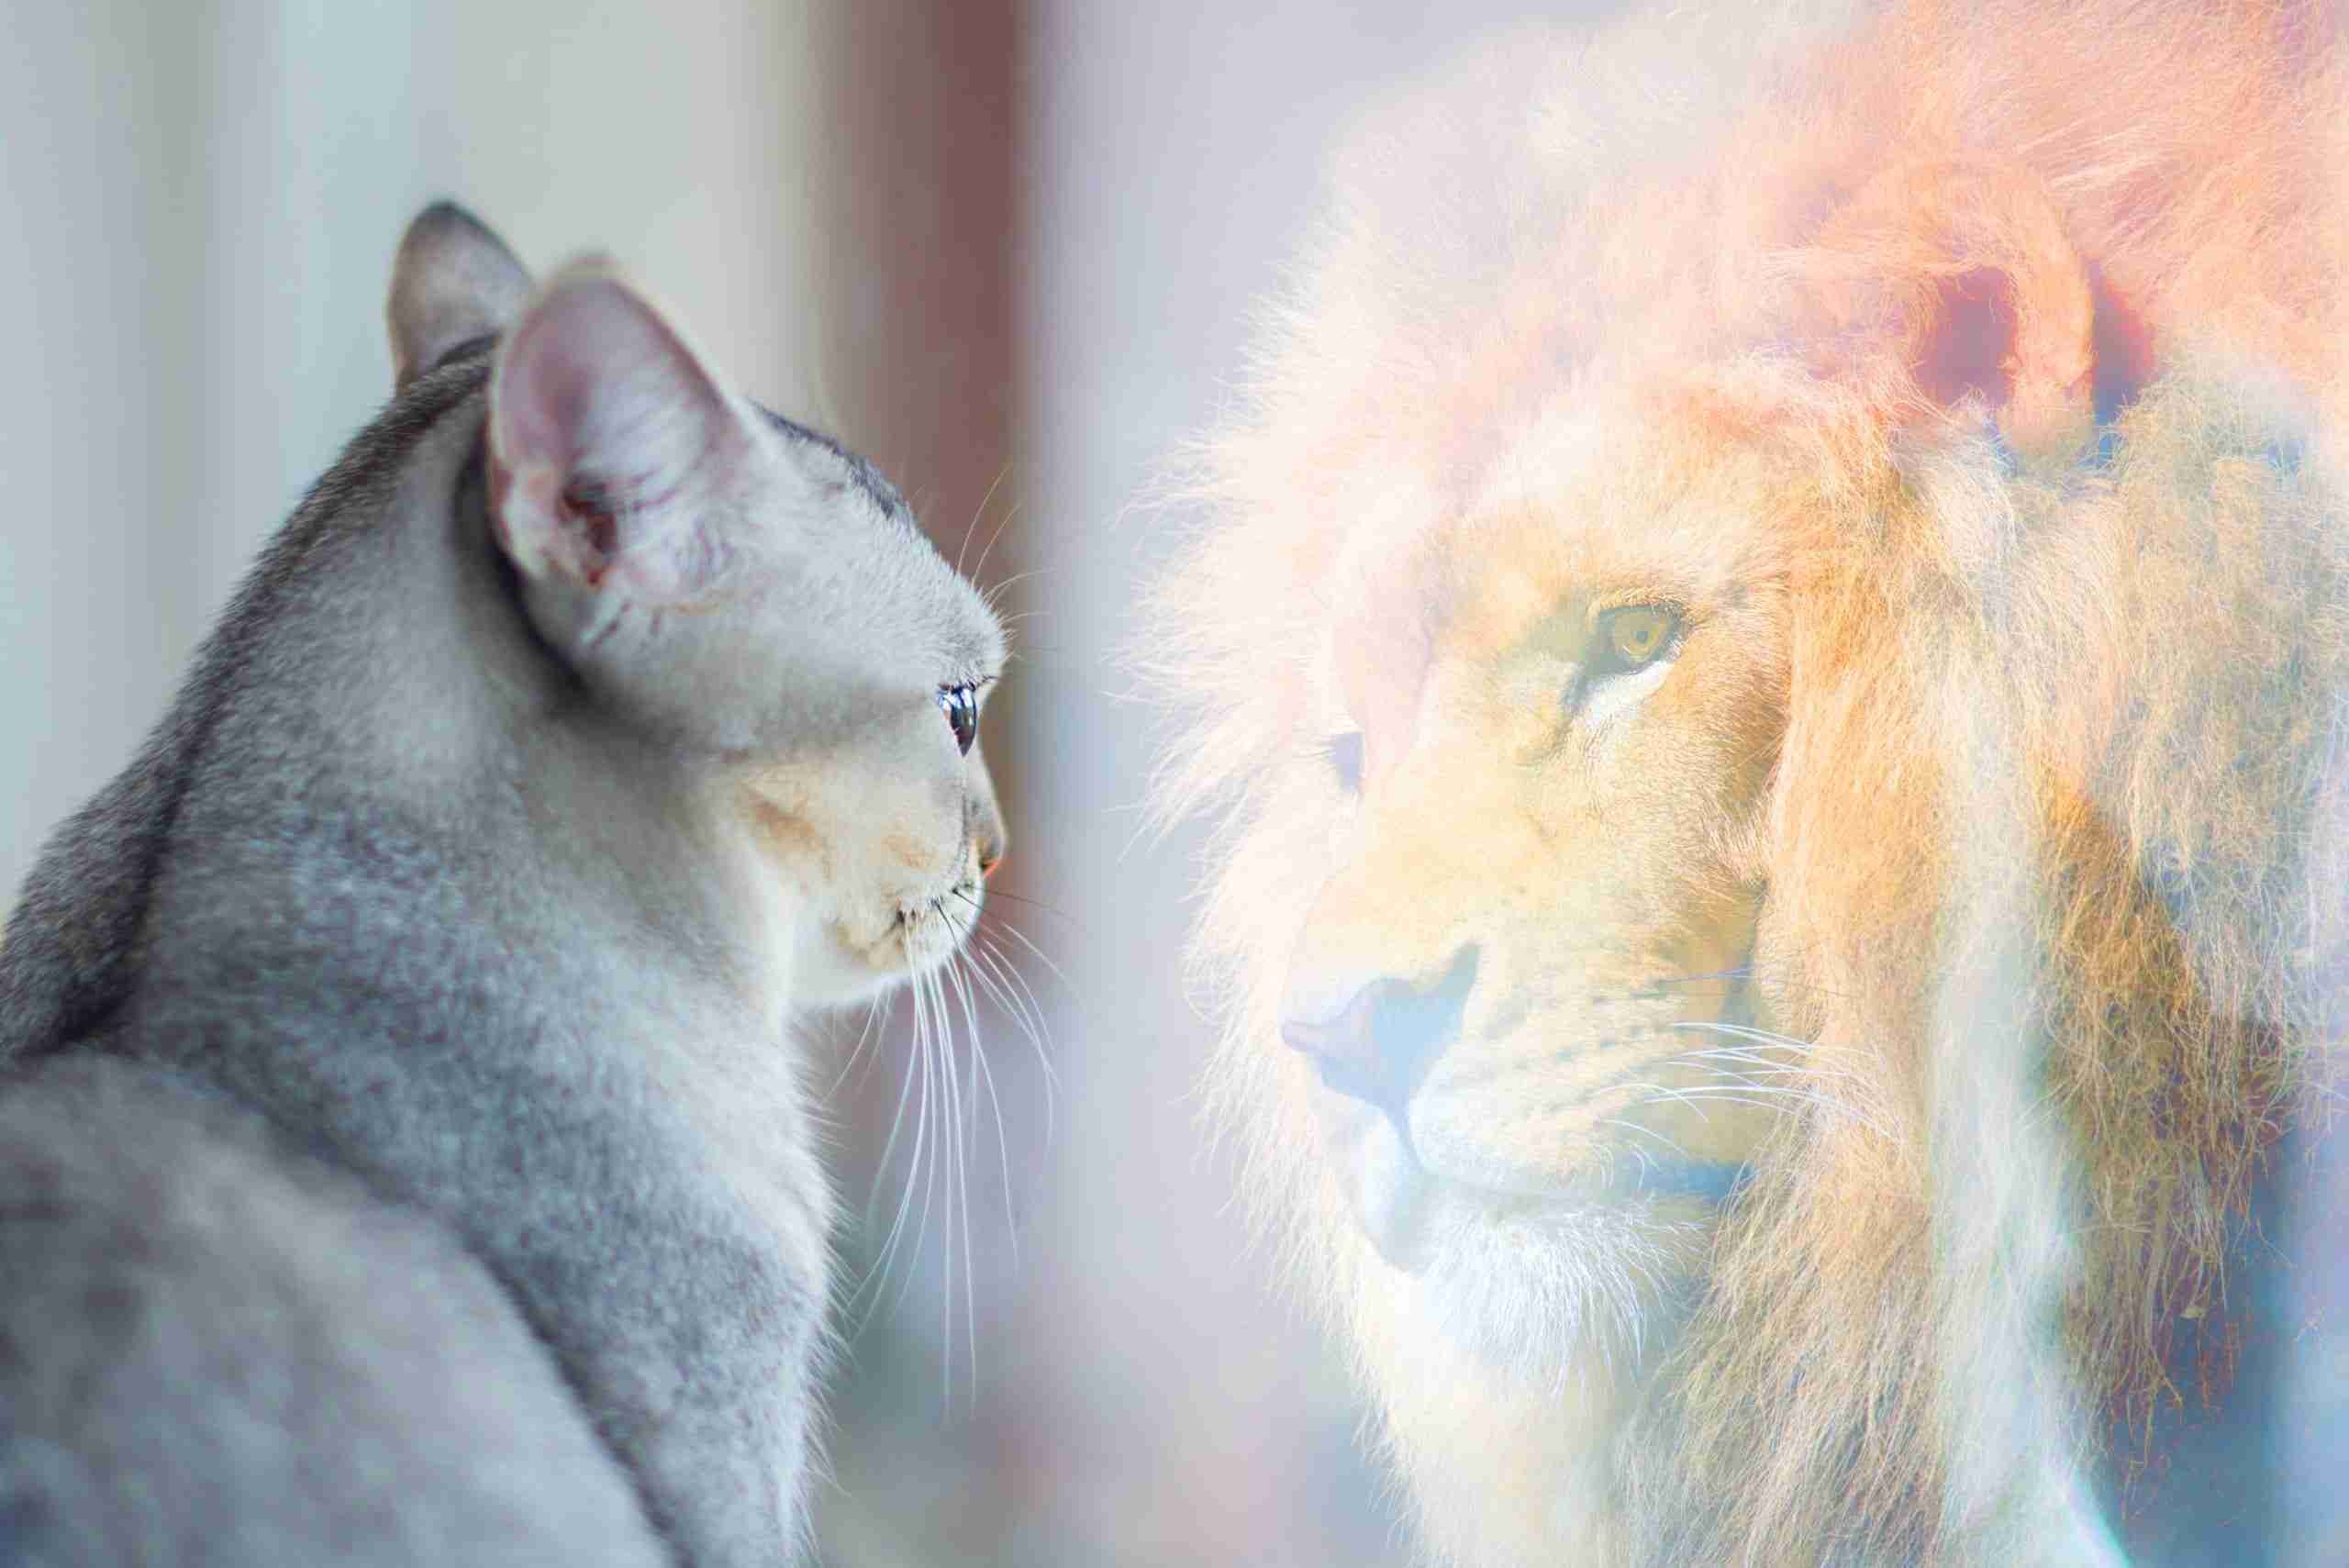 A cat sees it's own reflection as a lion